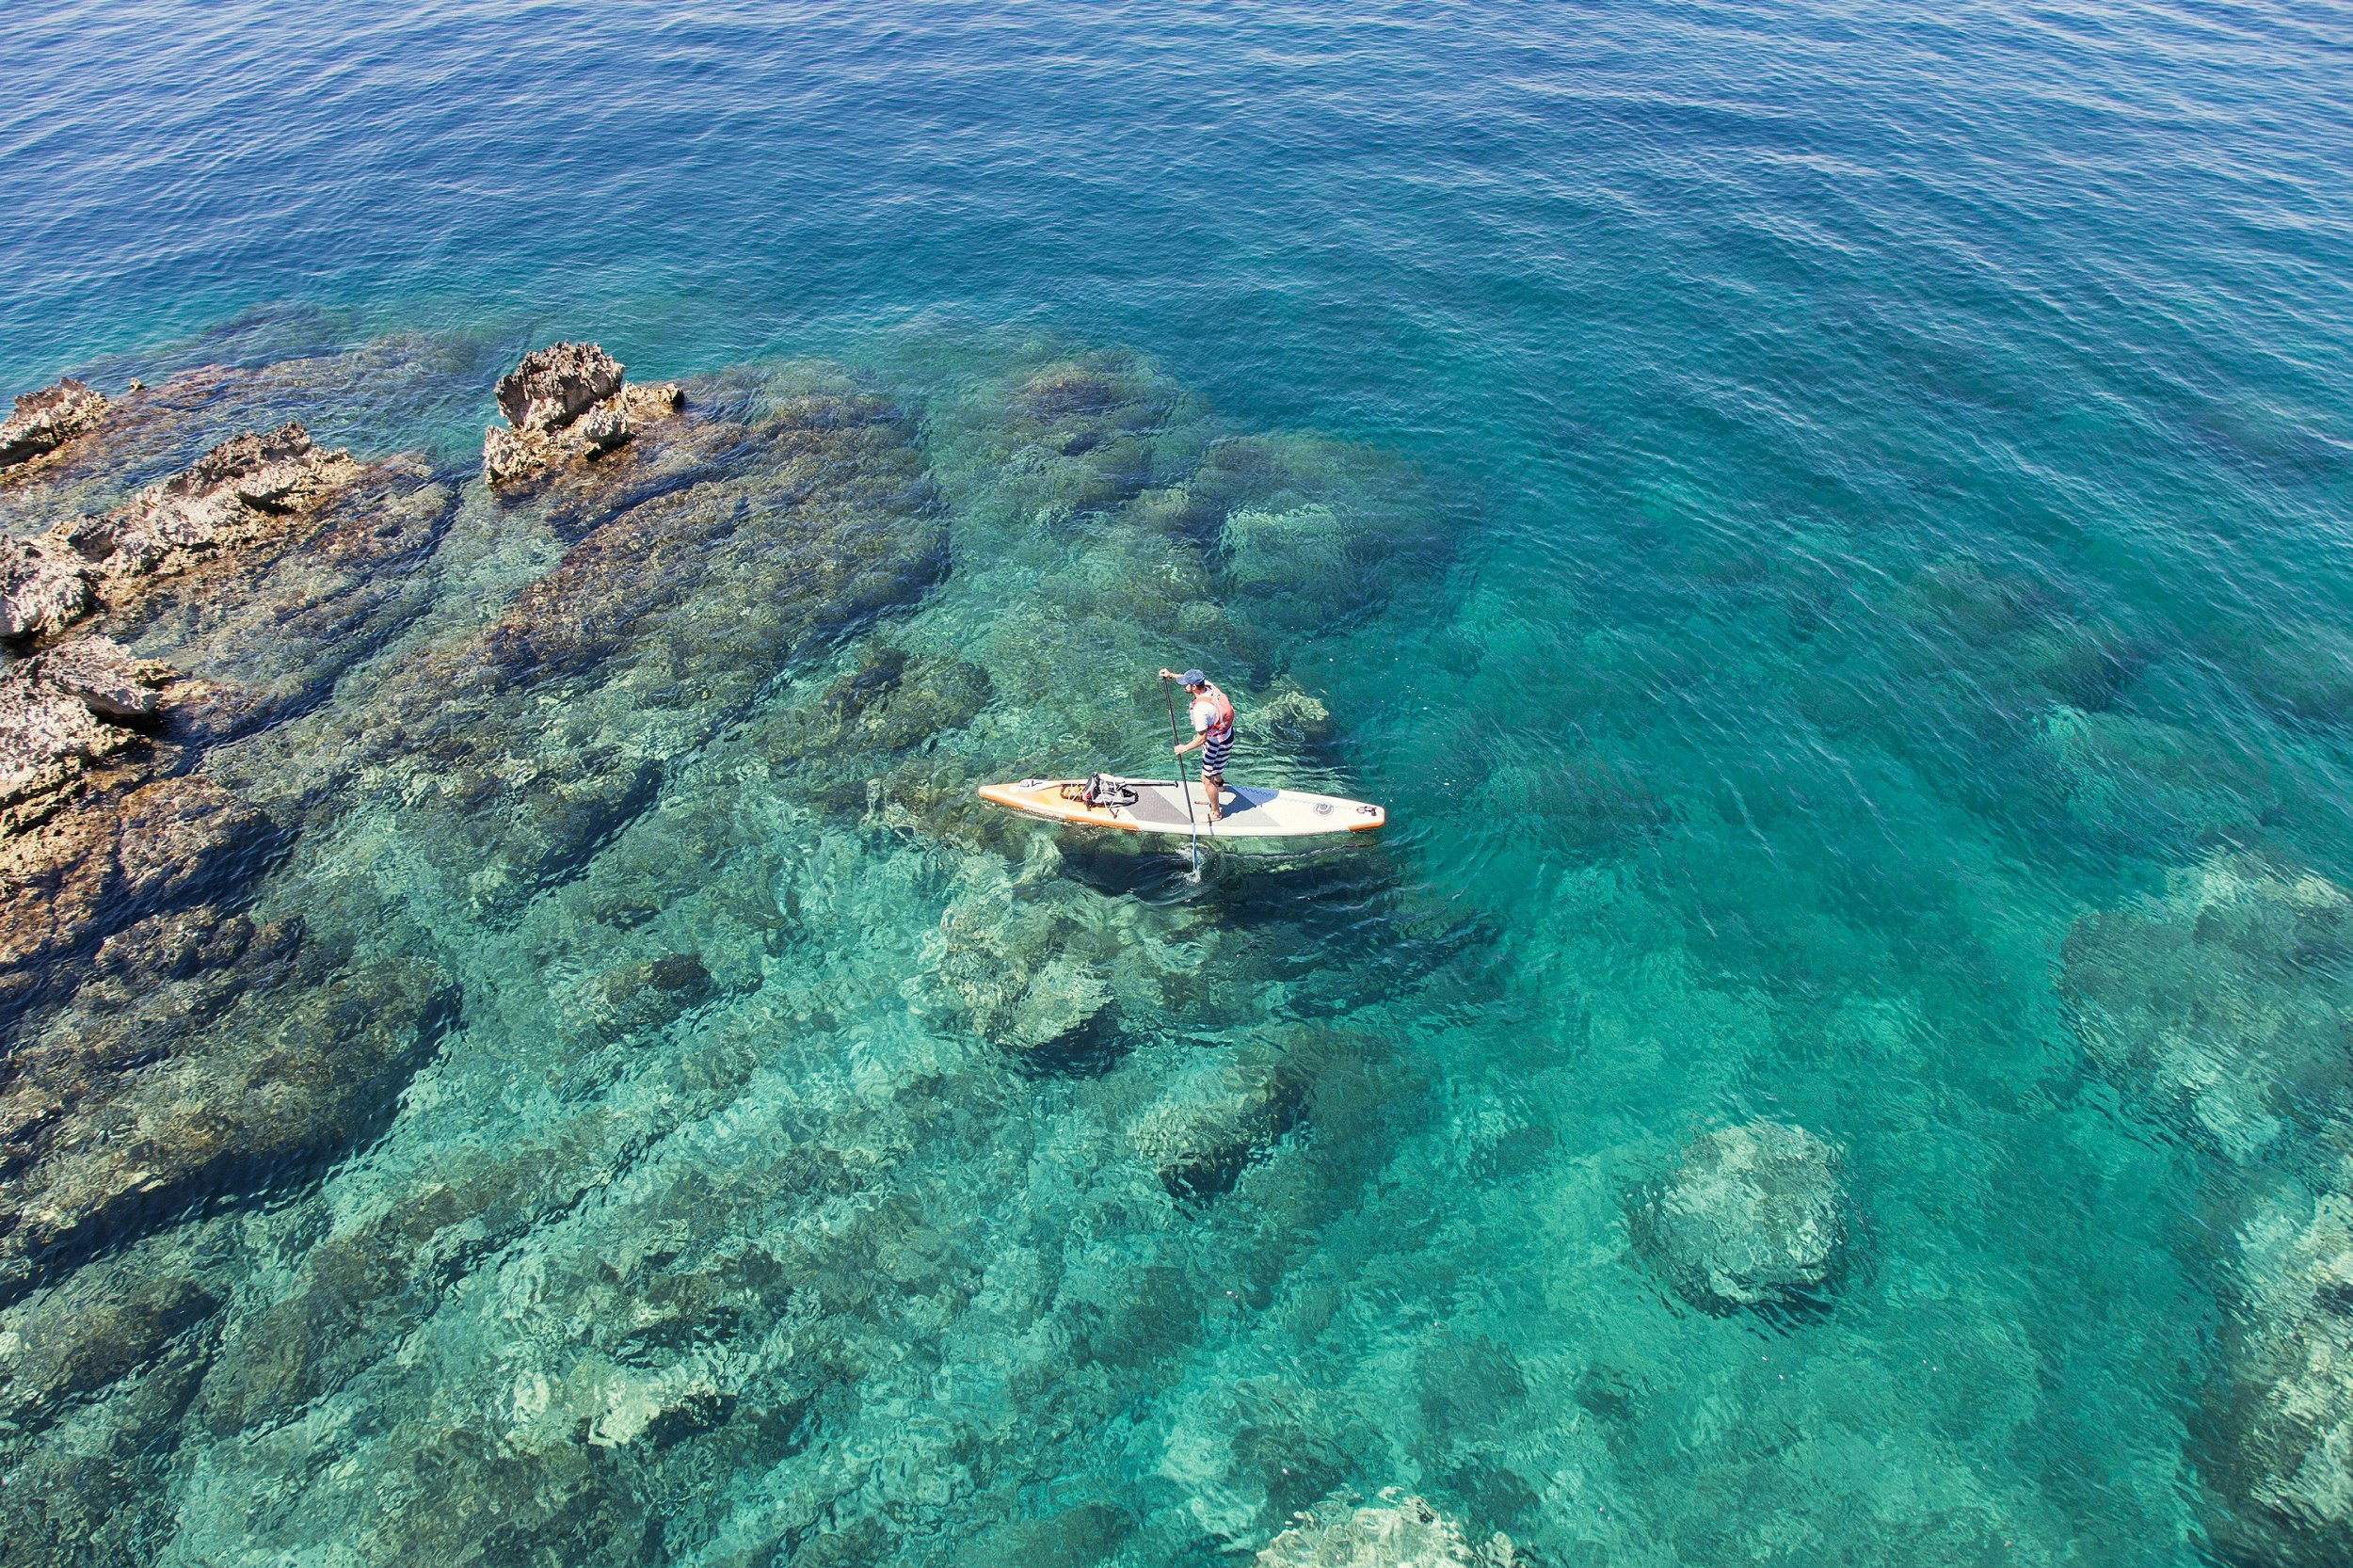 Shot from above, a man paddles an SUP along a rocky shore atop turquoise waters.